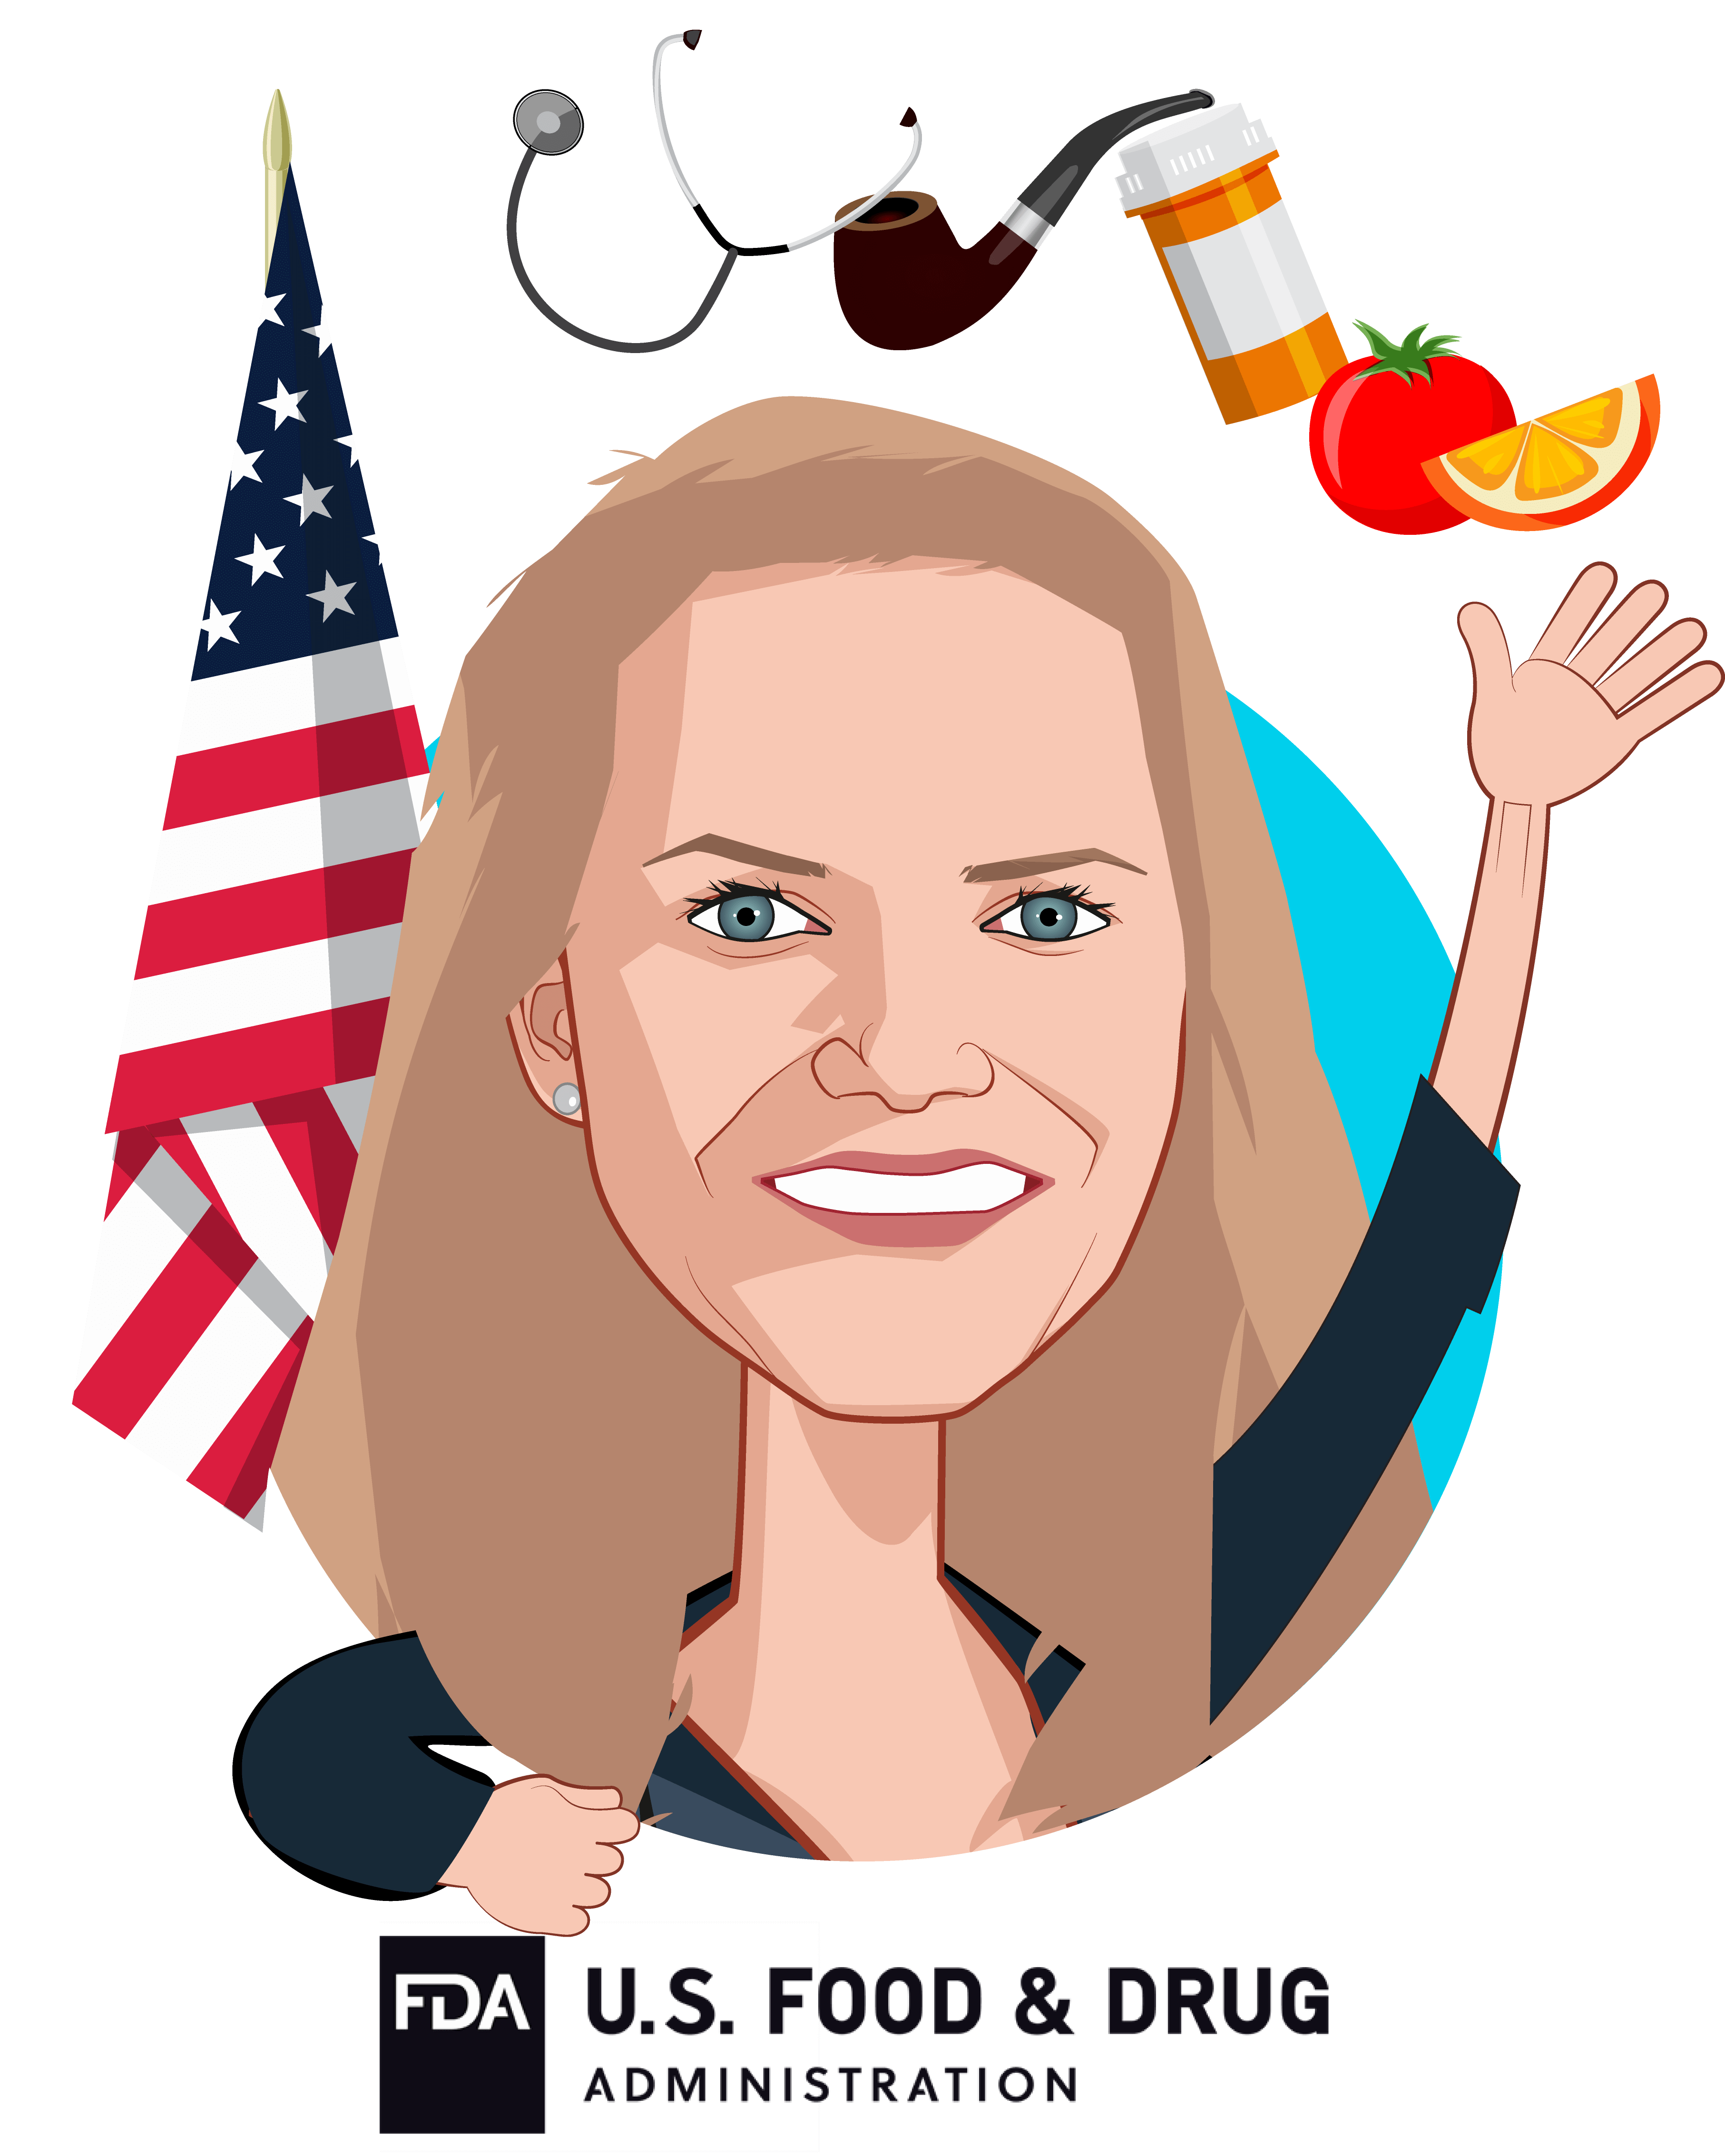 Caricature of Dr. Amy Abernethy, who is speaking at HLTH